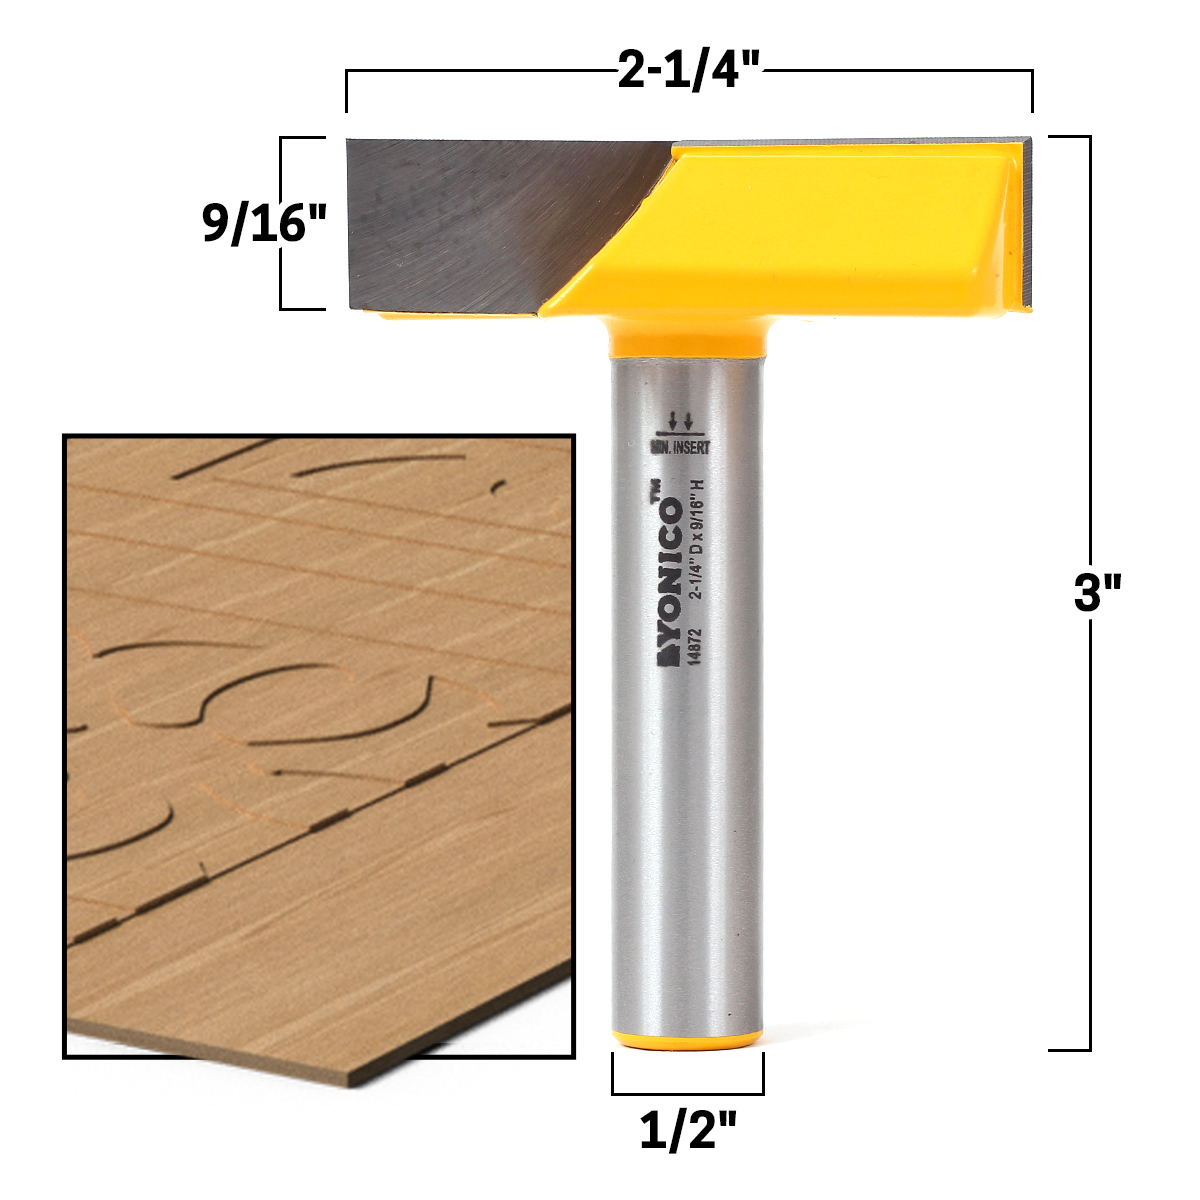 1/2 Inch Shank 2-1/4 Inch Diameter Bottom Cleaning Router Bit Woodworking 